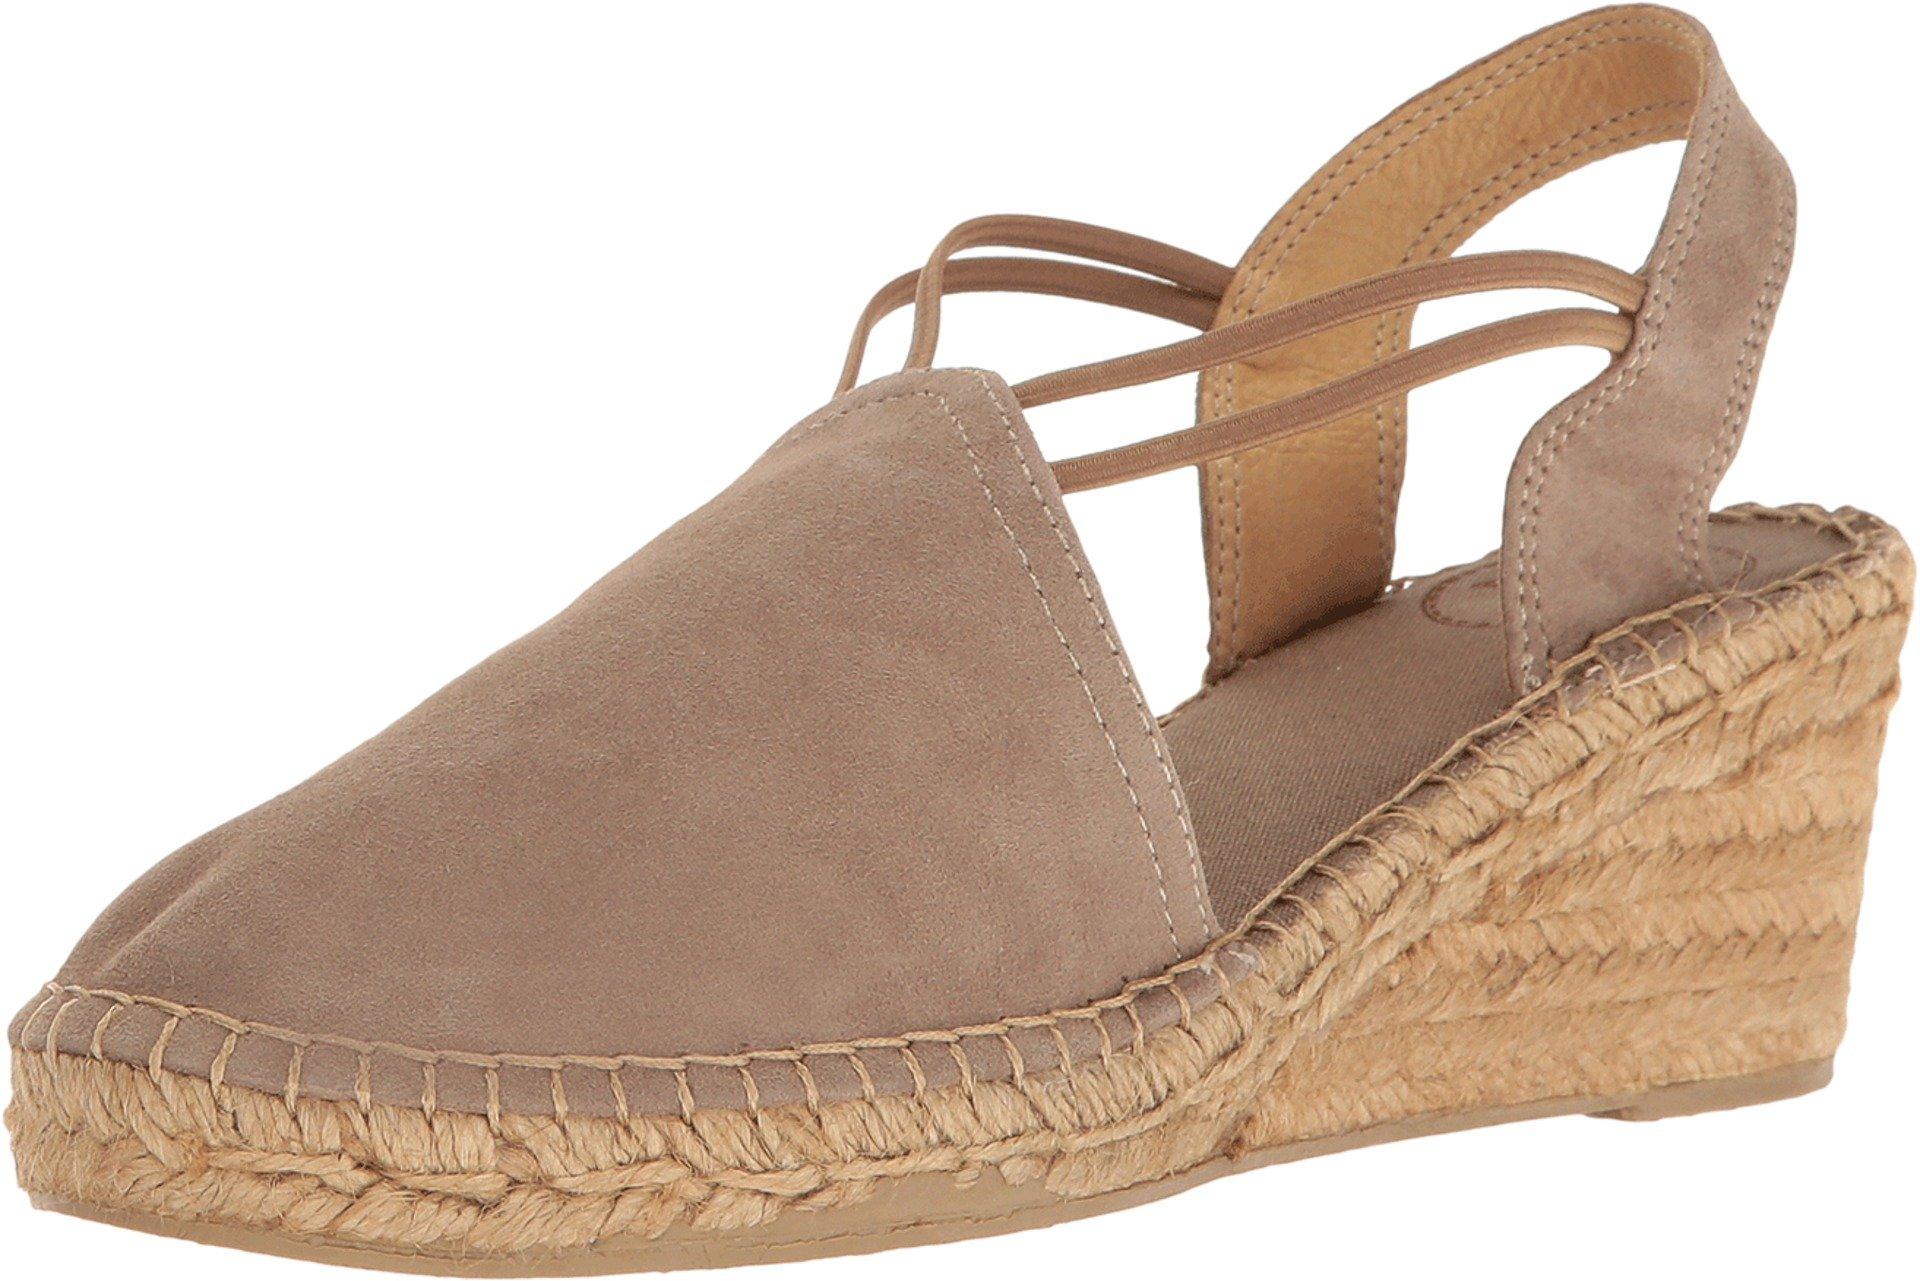 Toni Pons 'tremp' Slingback Espadrille Sandal in Taupe Suede (Natural ...